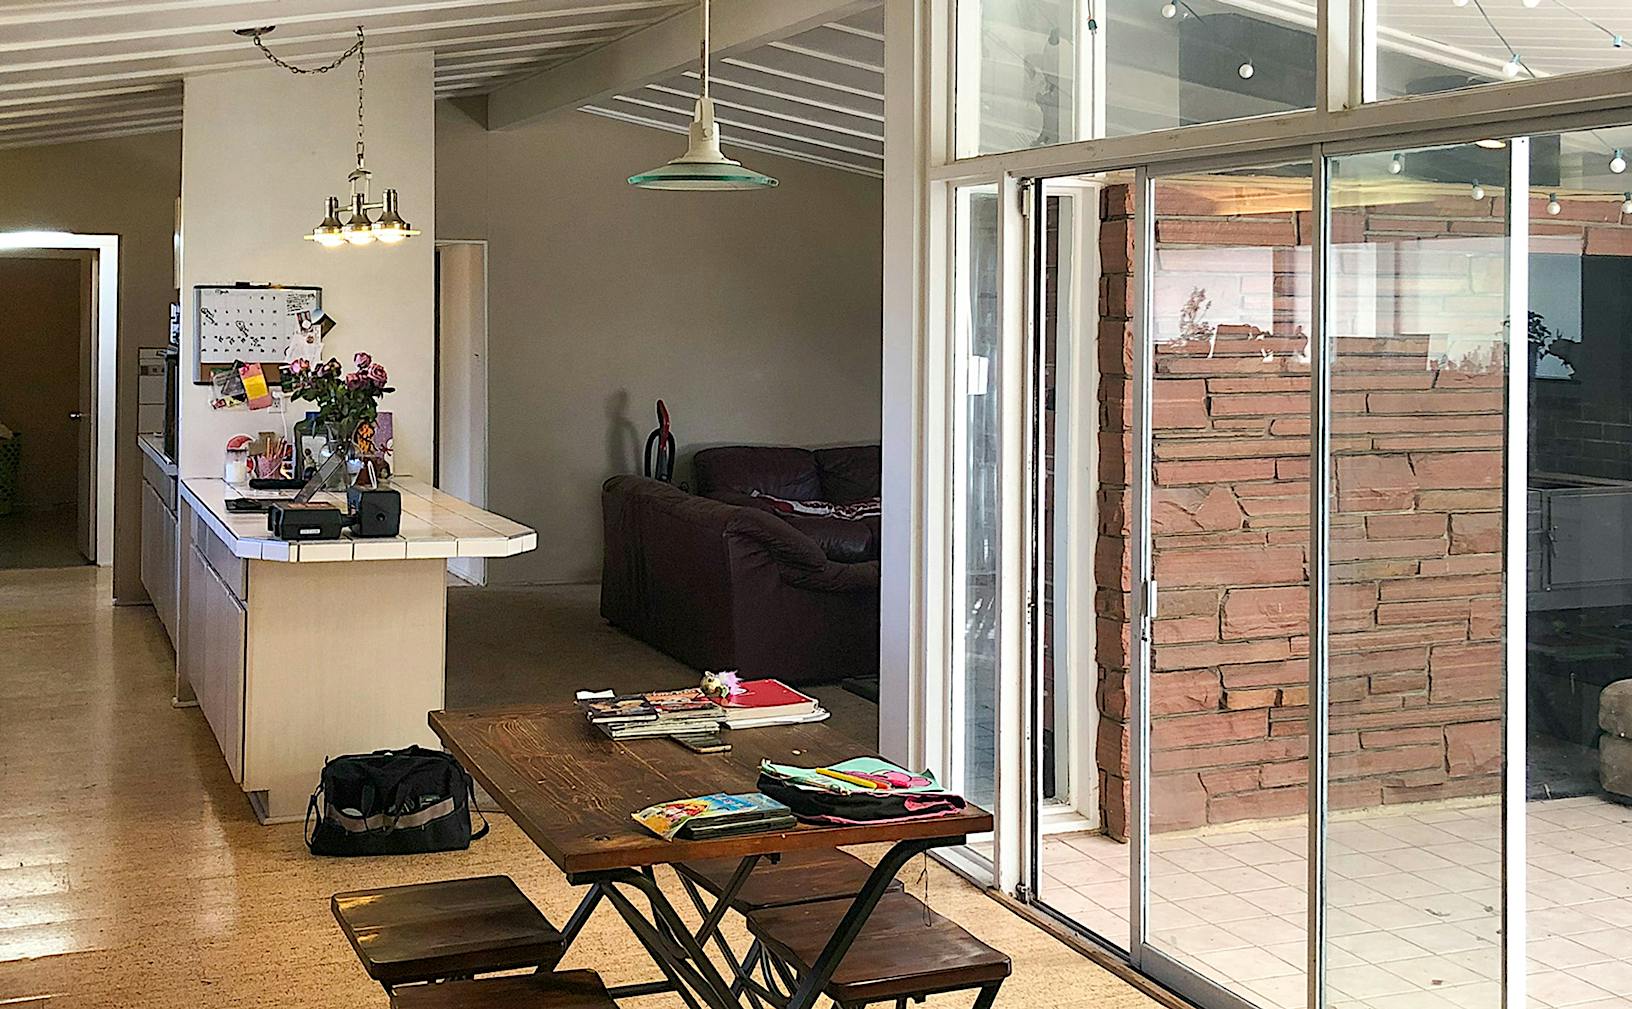 A bright, open-plan living space with large folding glass doors leading to an outdoor area with a brick wall.